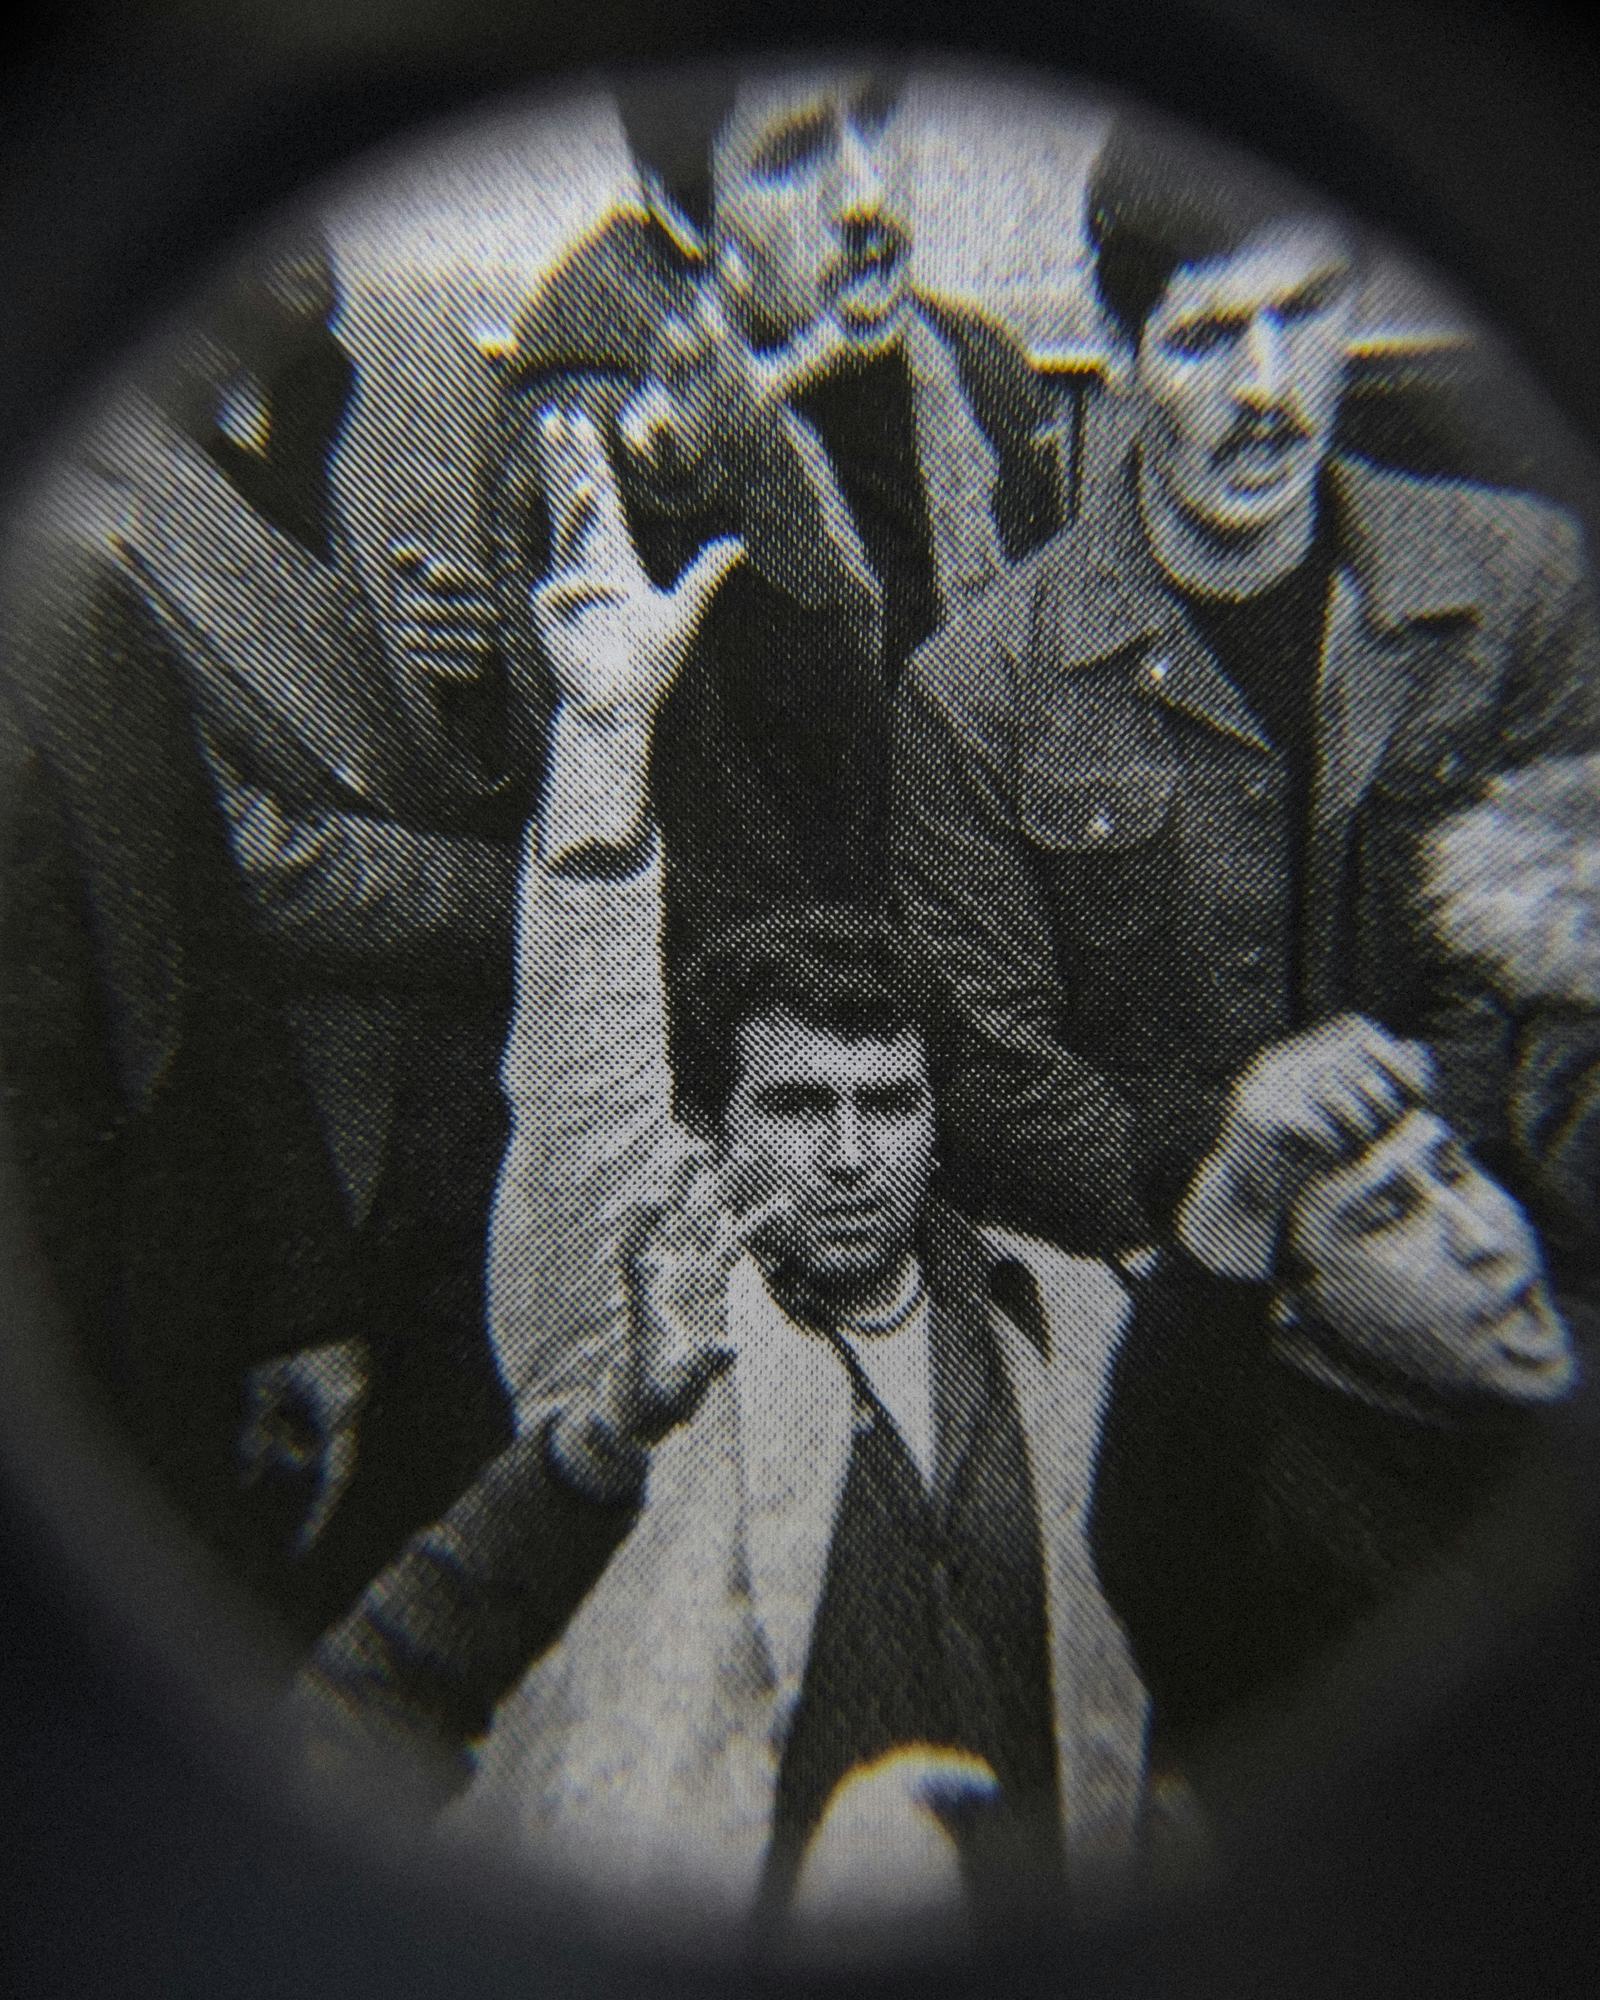 Black and white close-up image of an existing photograph, showing a man in the middle of a protesting crowd staring into the camera, raising his arm and hand. Shot through a magnifying lens © Amin Yousefi